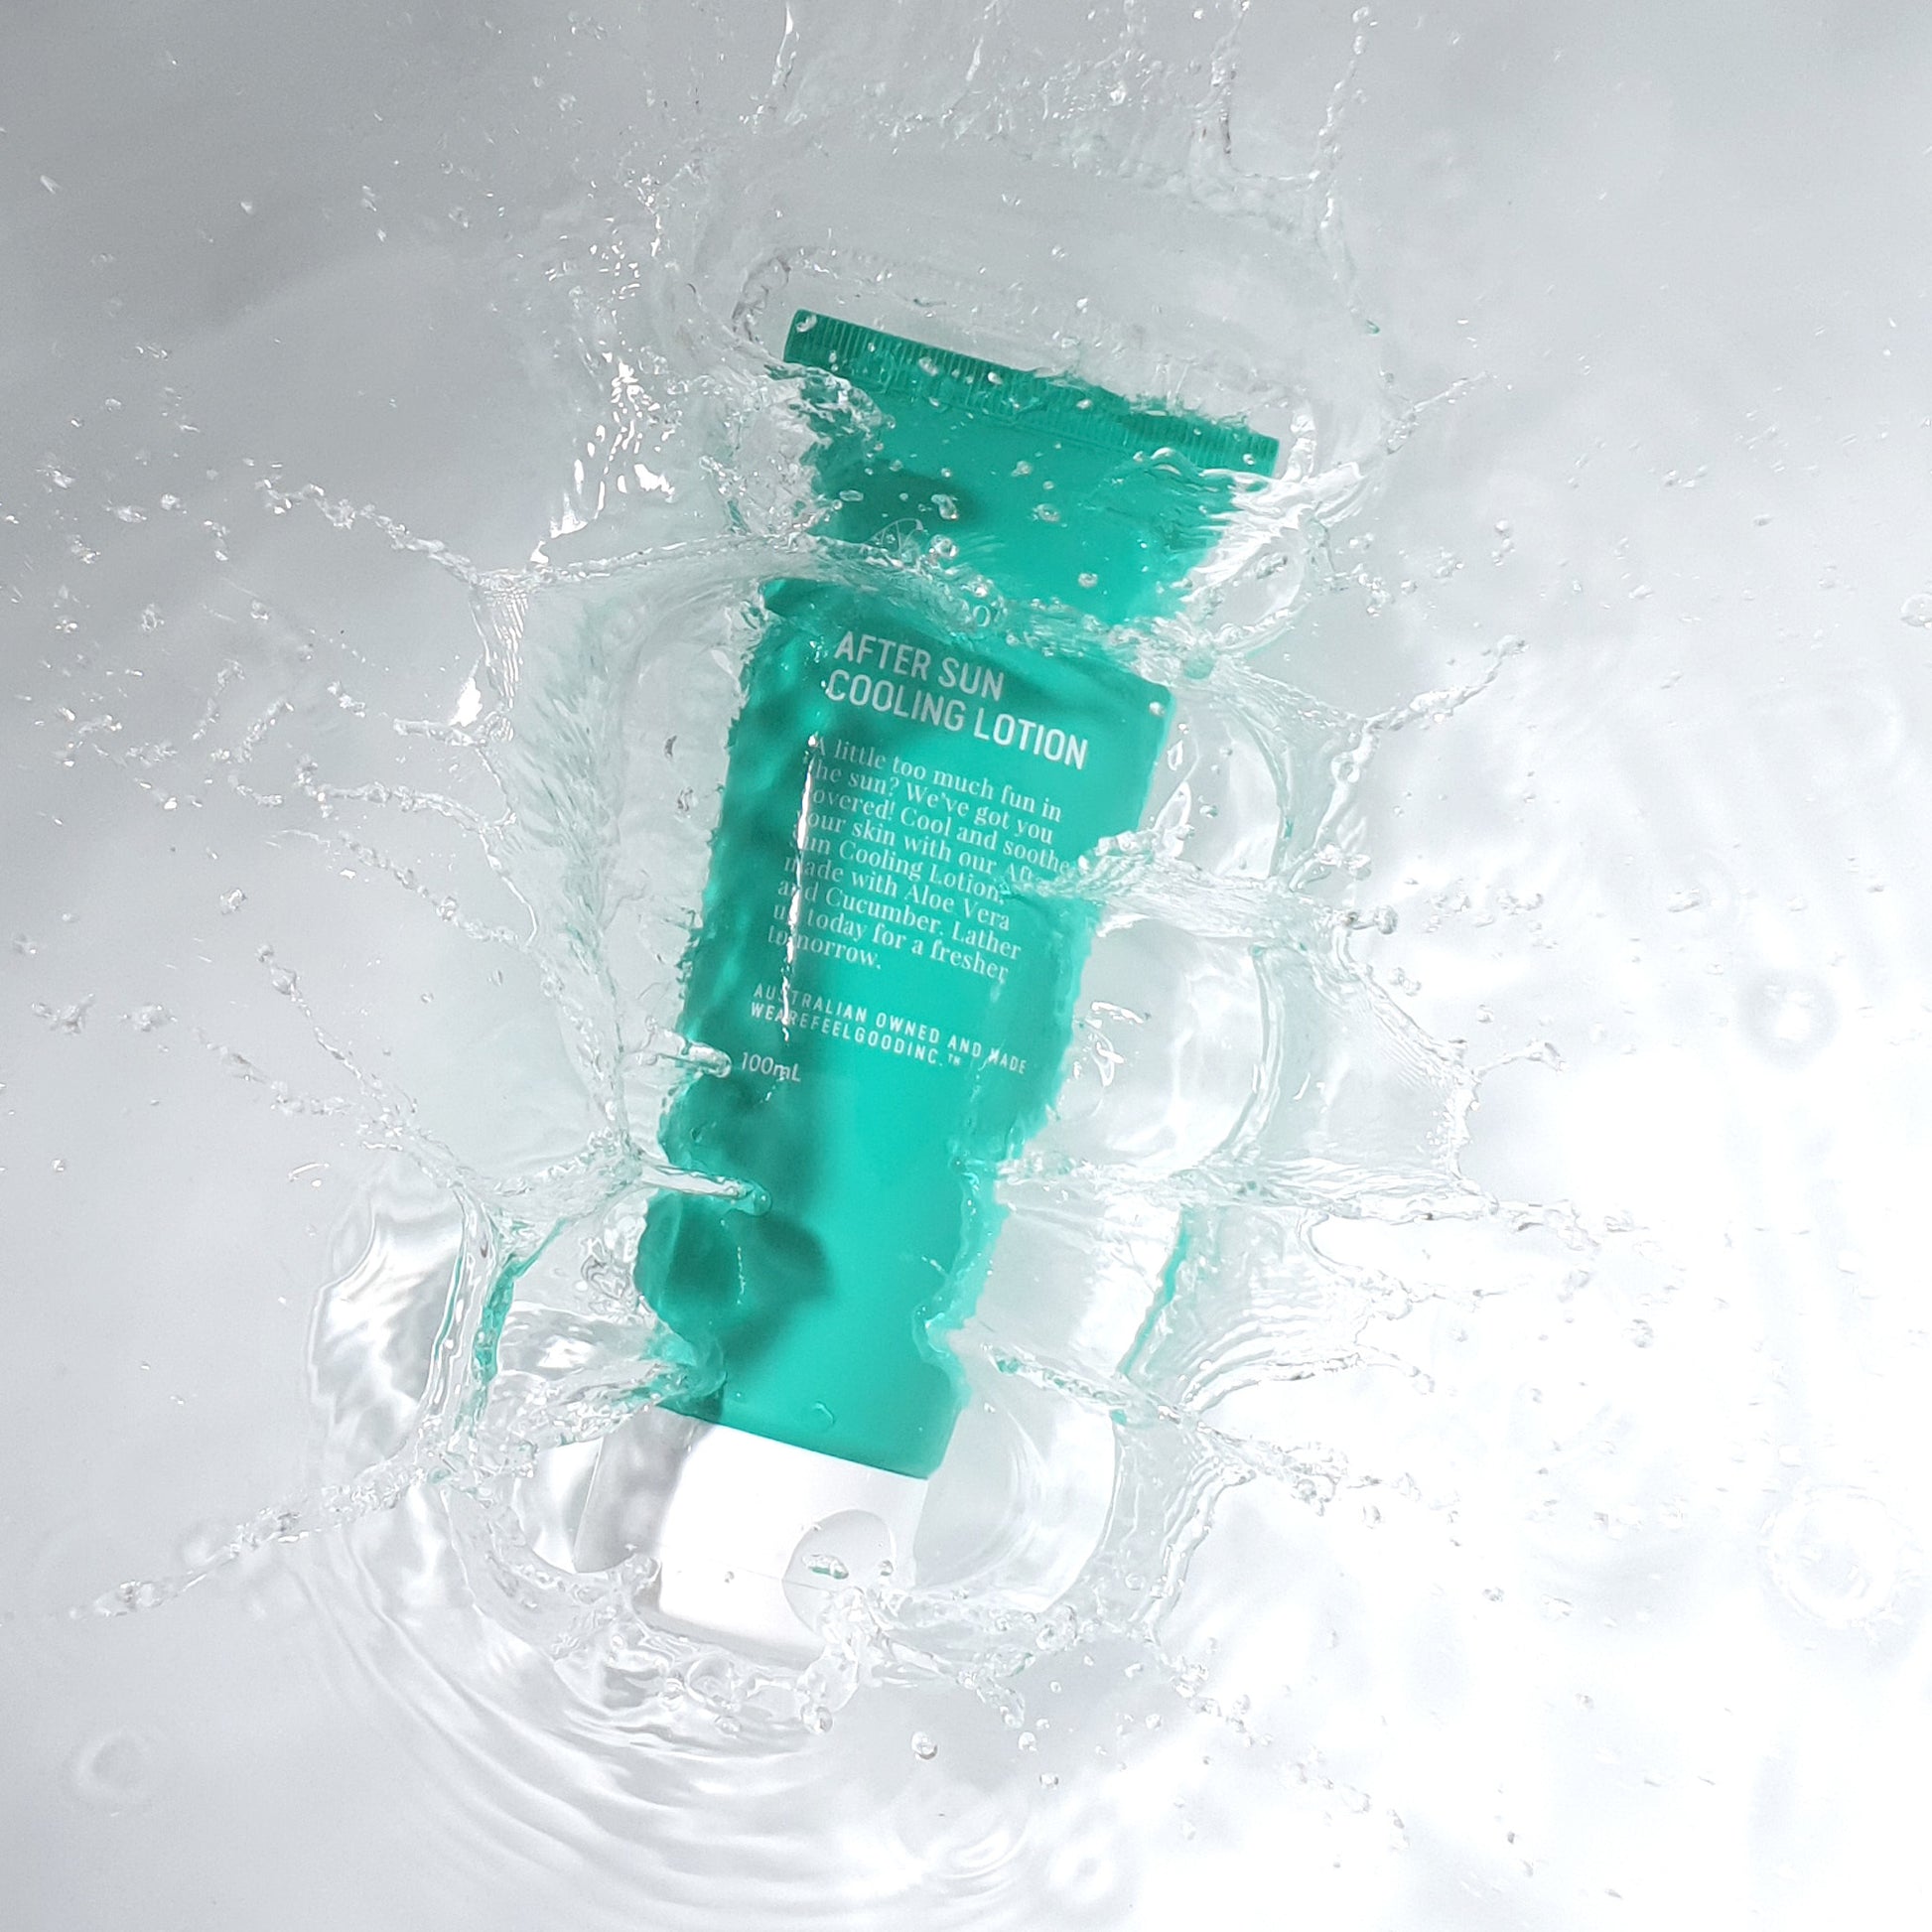 A green tube of 'We Are Feel Good Inc. After Sun Cooling Lotion' submerged in clear water, creating a dynamic splash effect